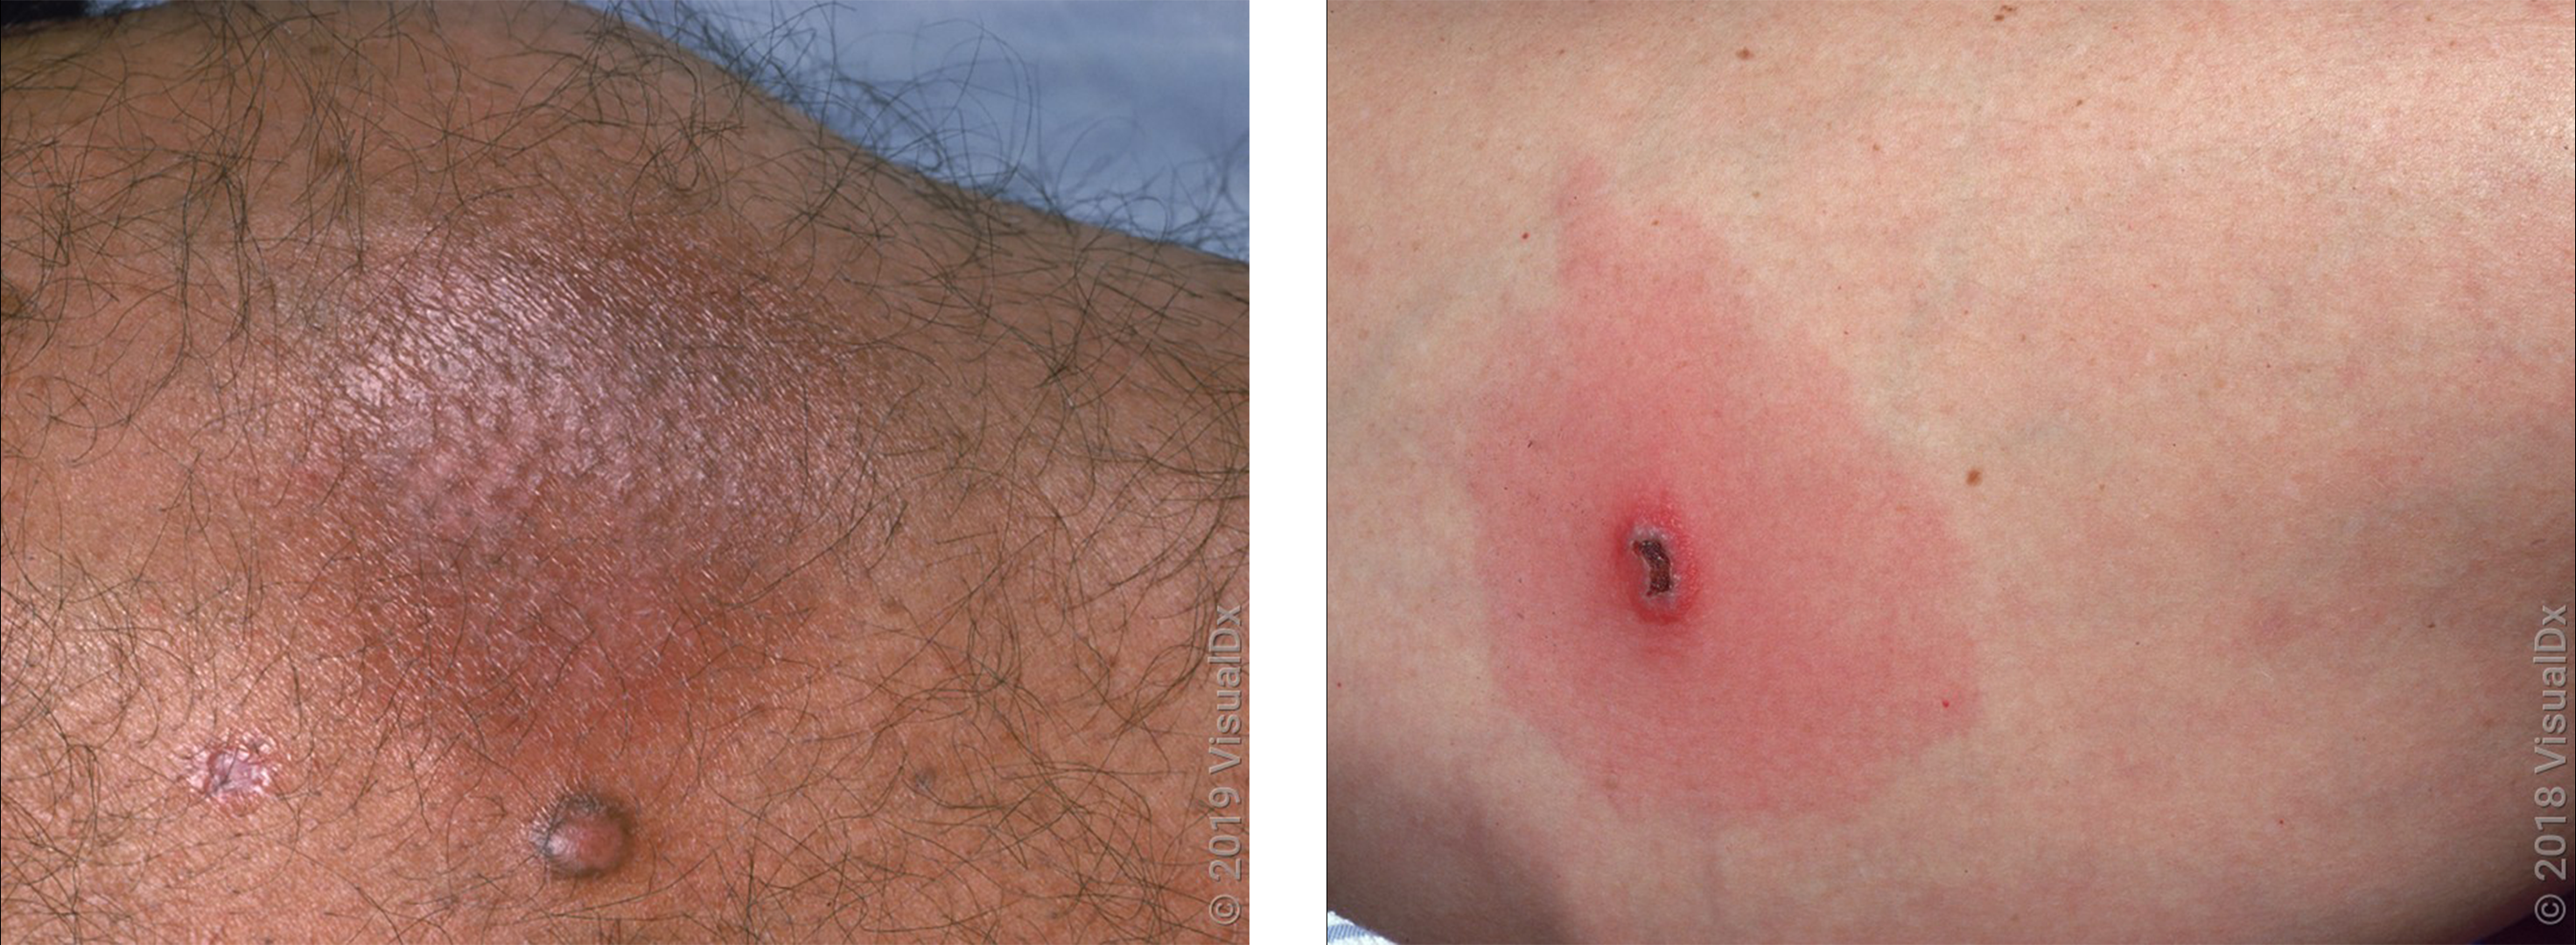 Left: Close-up of darker skin with a purple-brown round patch from a spider bite. Right: Close-up of skin with a round patch with different shades of red that looks like a bullseye rash.